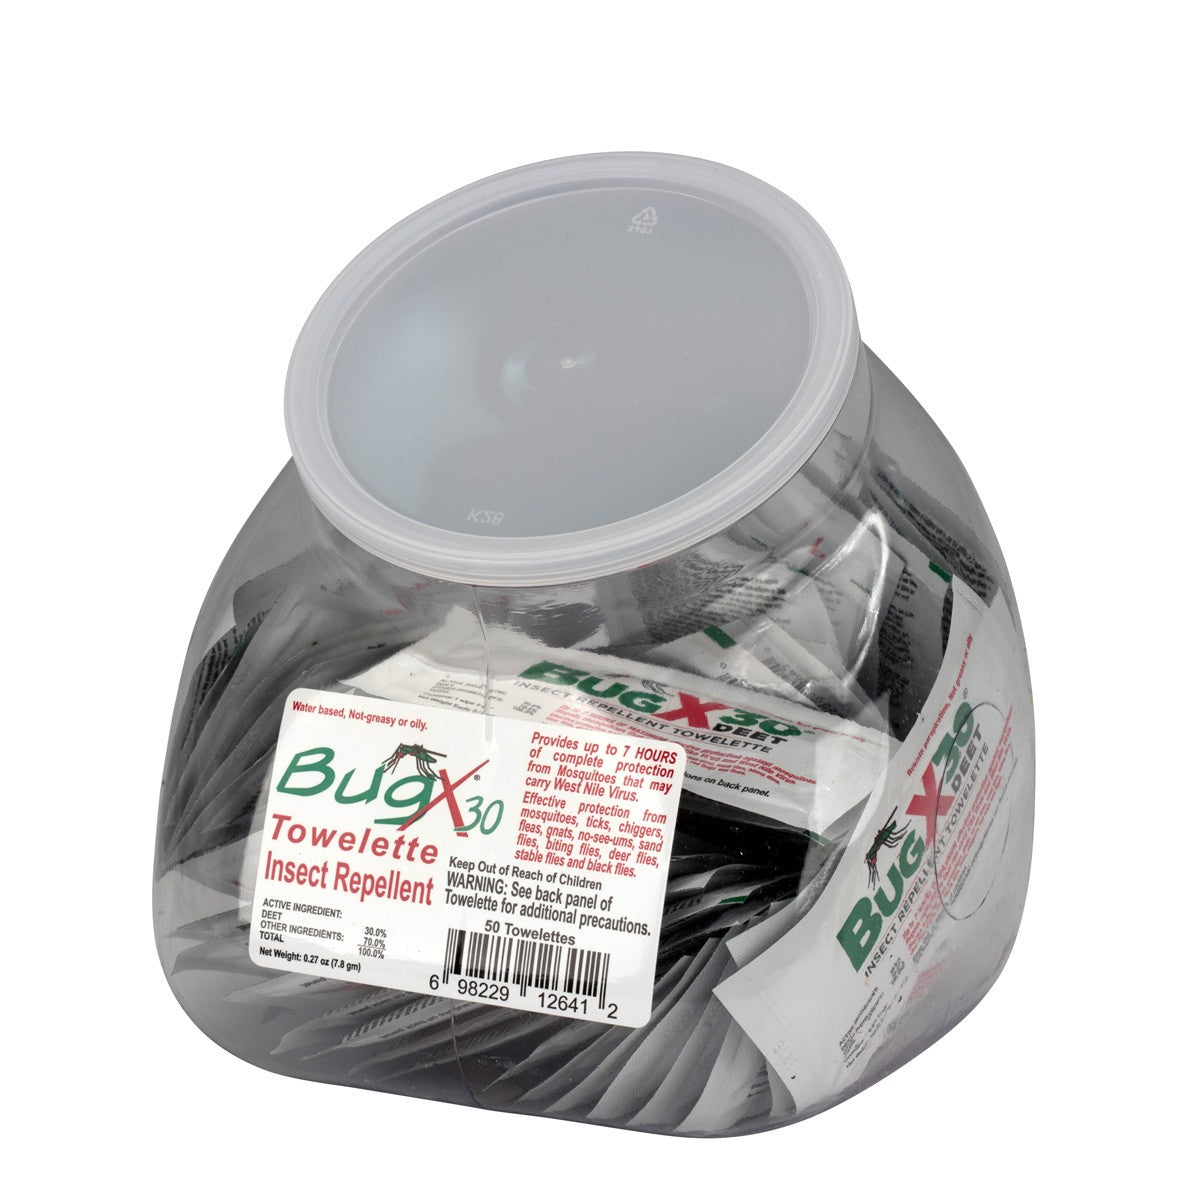 BugX30 Fish Bowl Insect Repellent Wipes, 50 Per Bowl - LIMITED TIME OFFER! - BS-FAK-18-760-1-FM